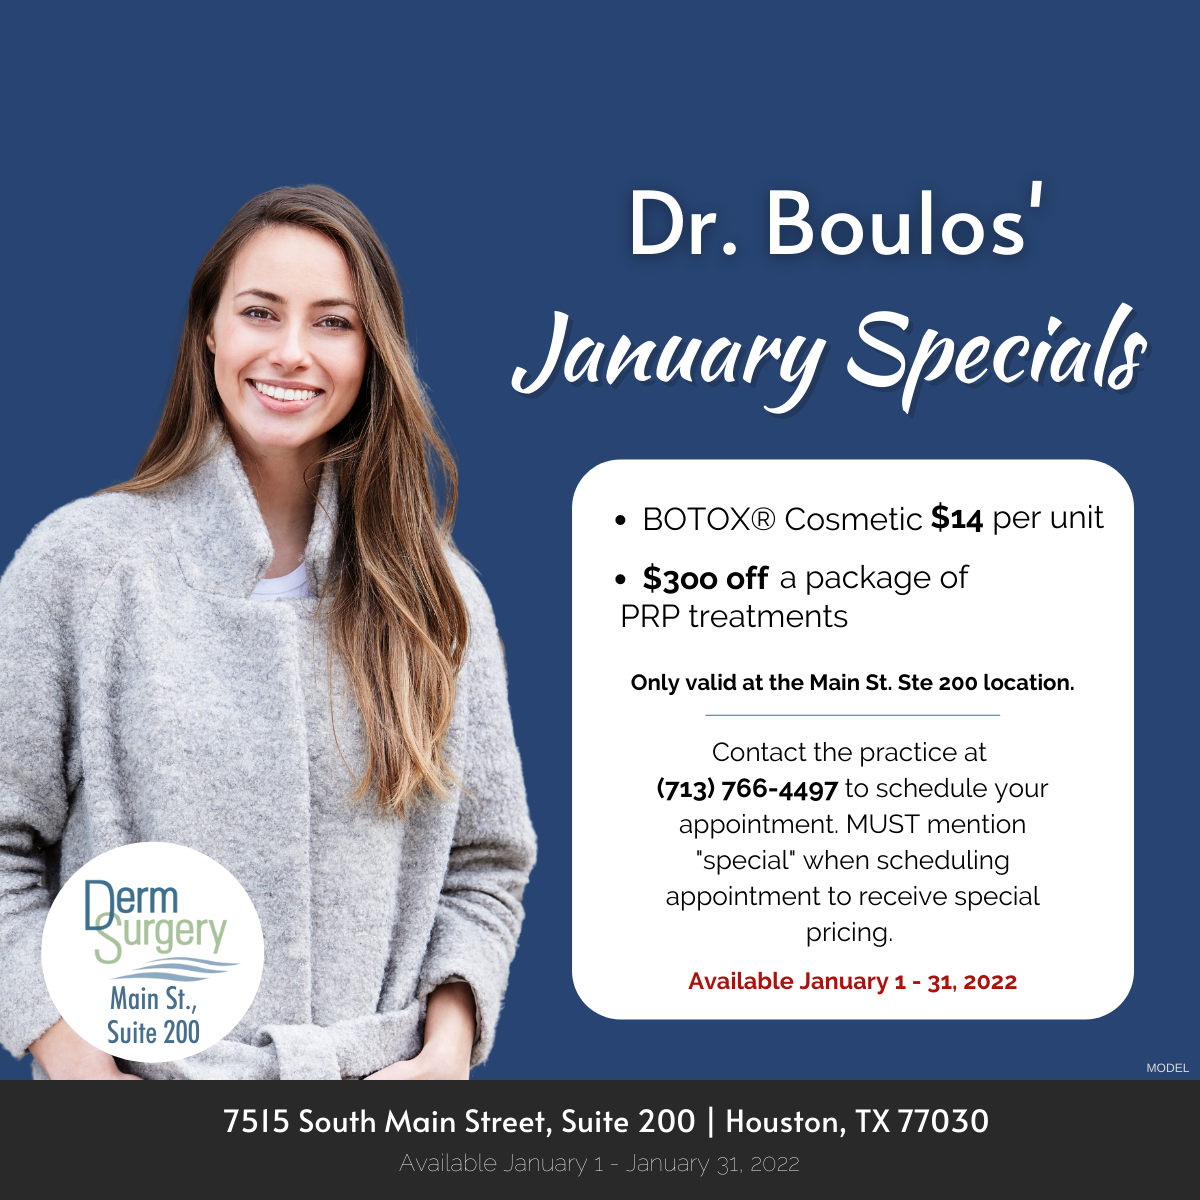 Dr. Boulos' January Specials